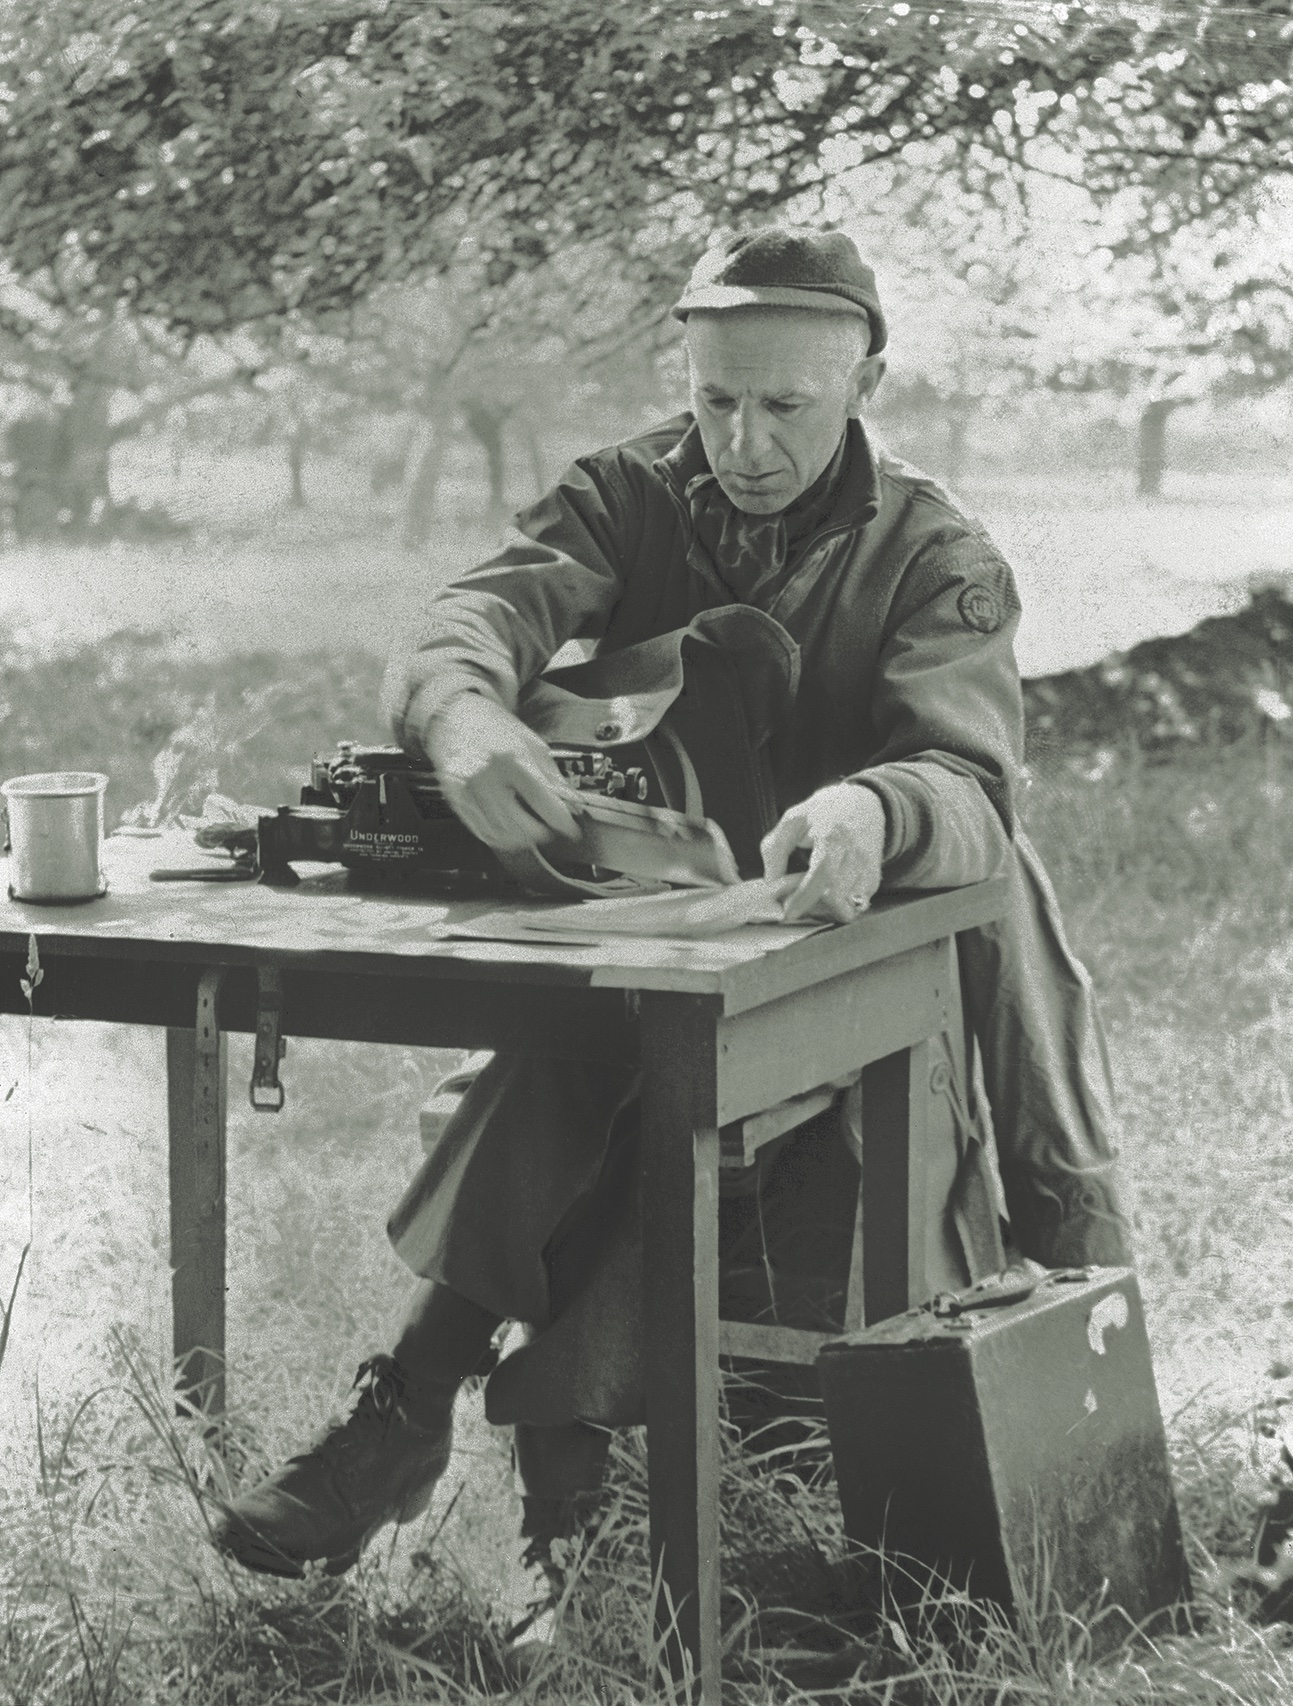 Pyle works at a desk in the field in Europe in 1944. (Bettmann/Getty Image)